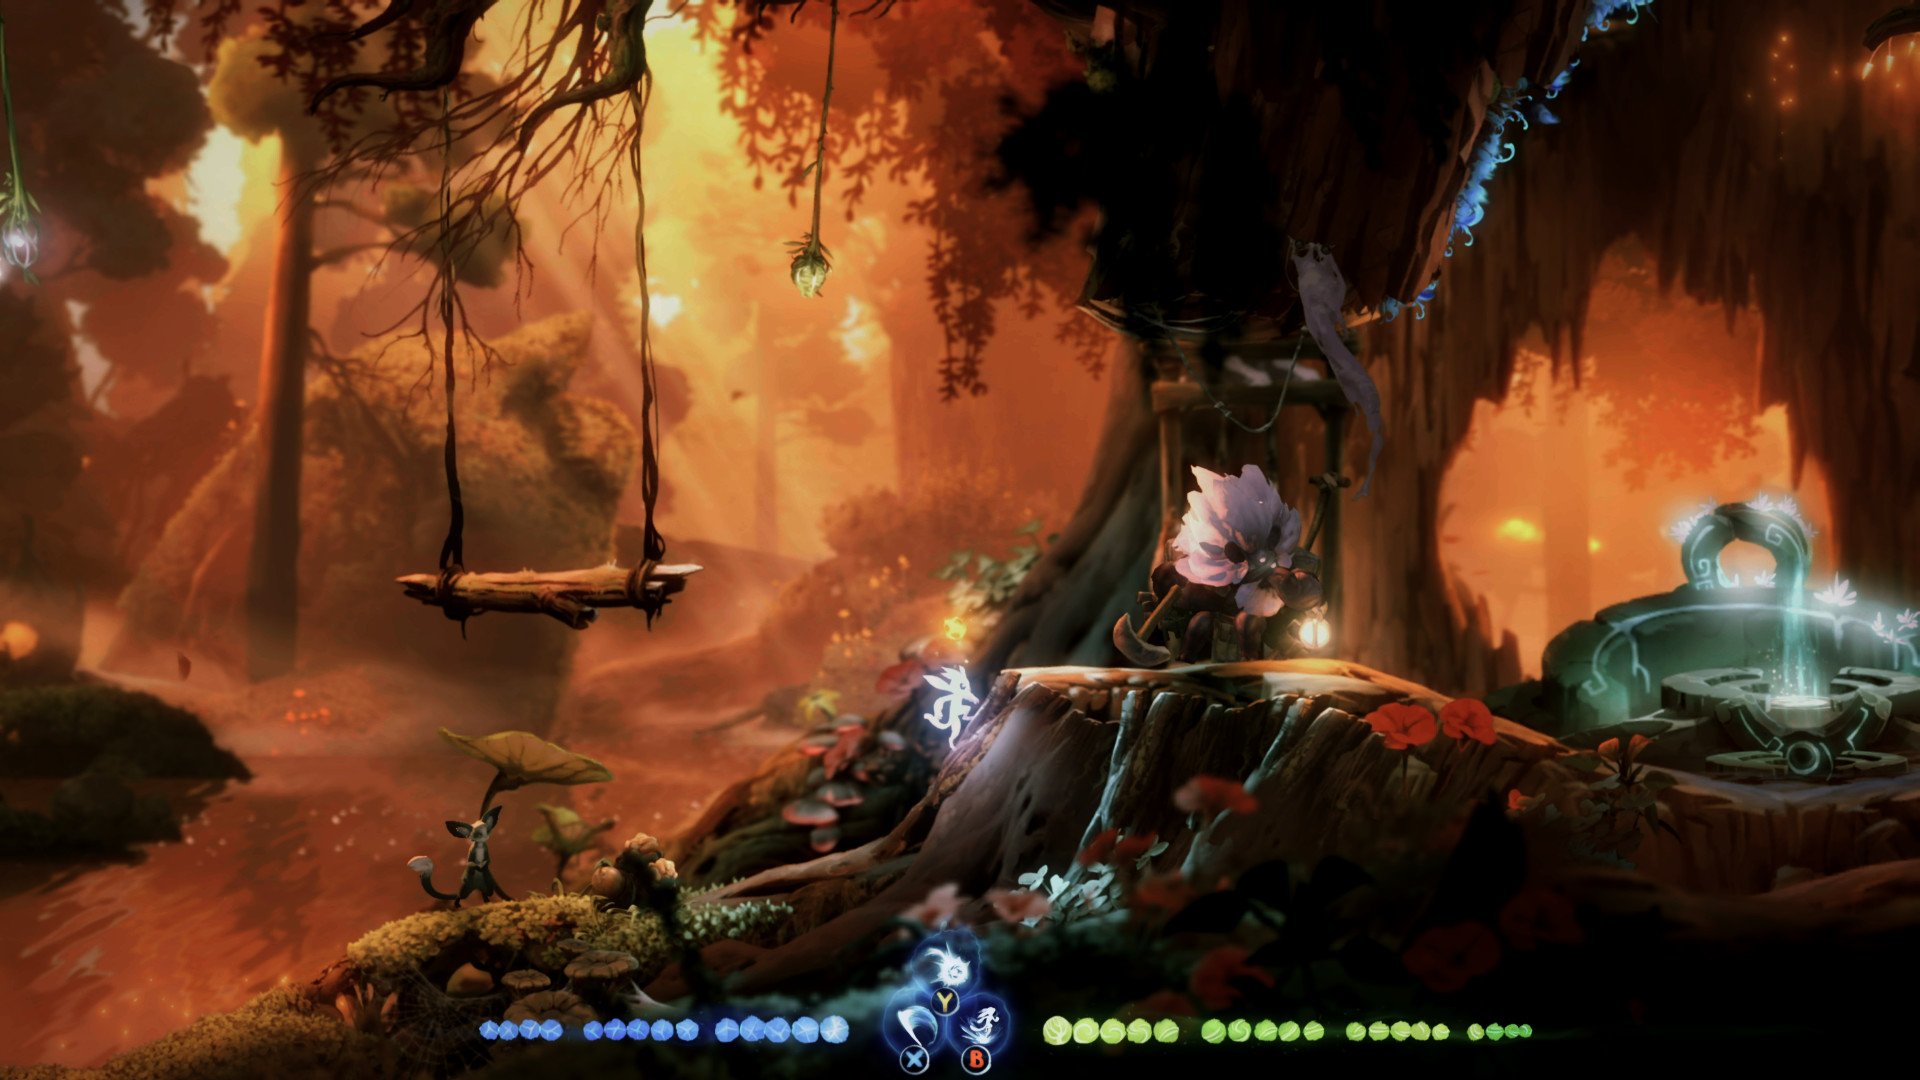 ori-and-the-will-of-the-wisps-review-pics_1.jpg